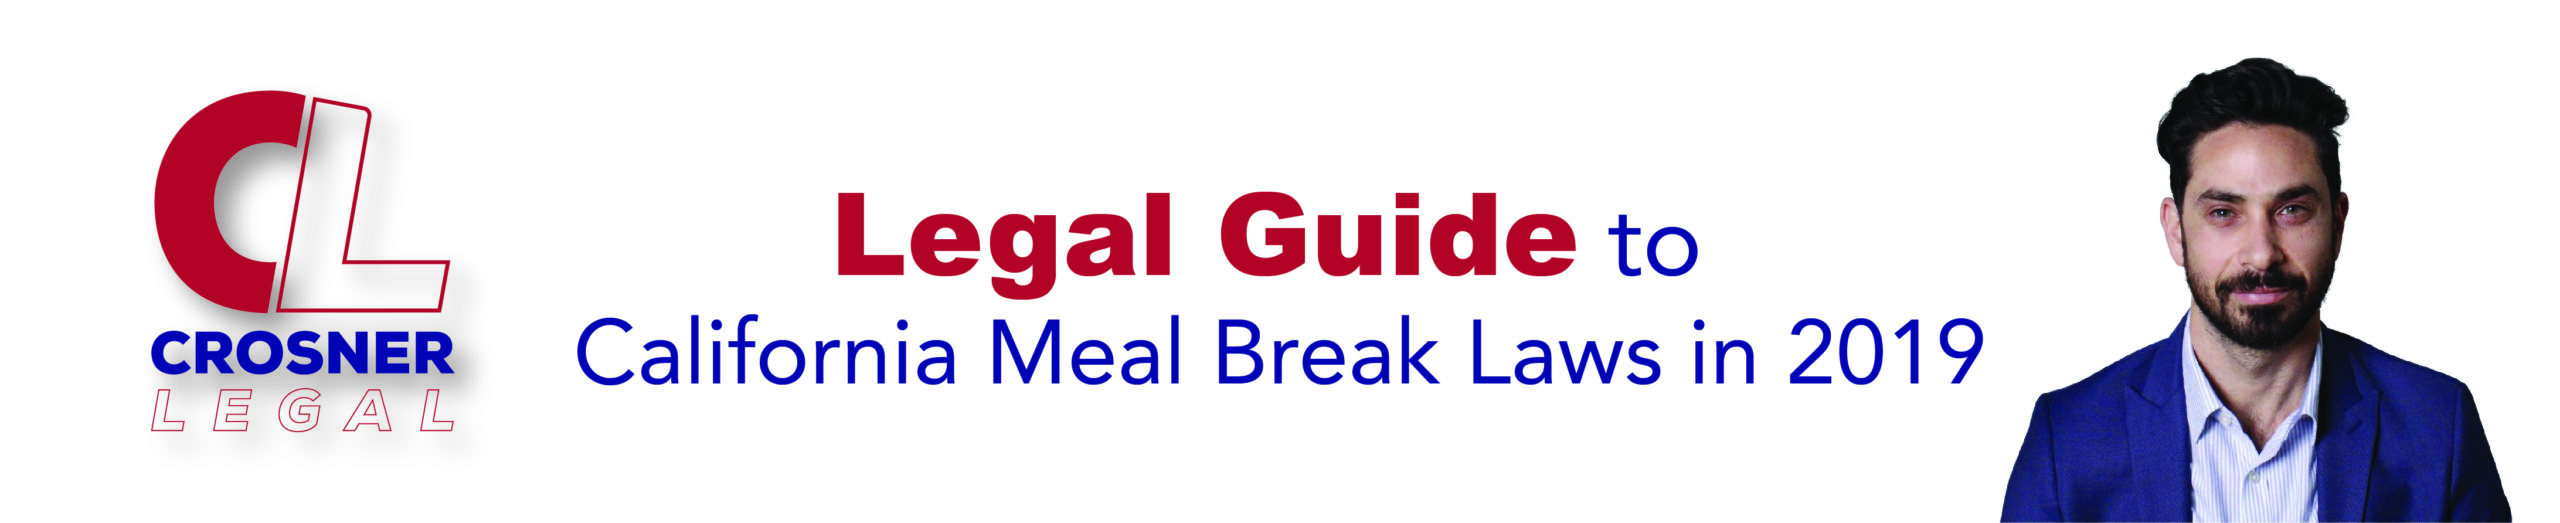 Legal Guide to California Meal Break Laws in 2019